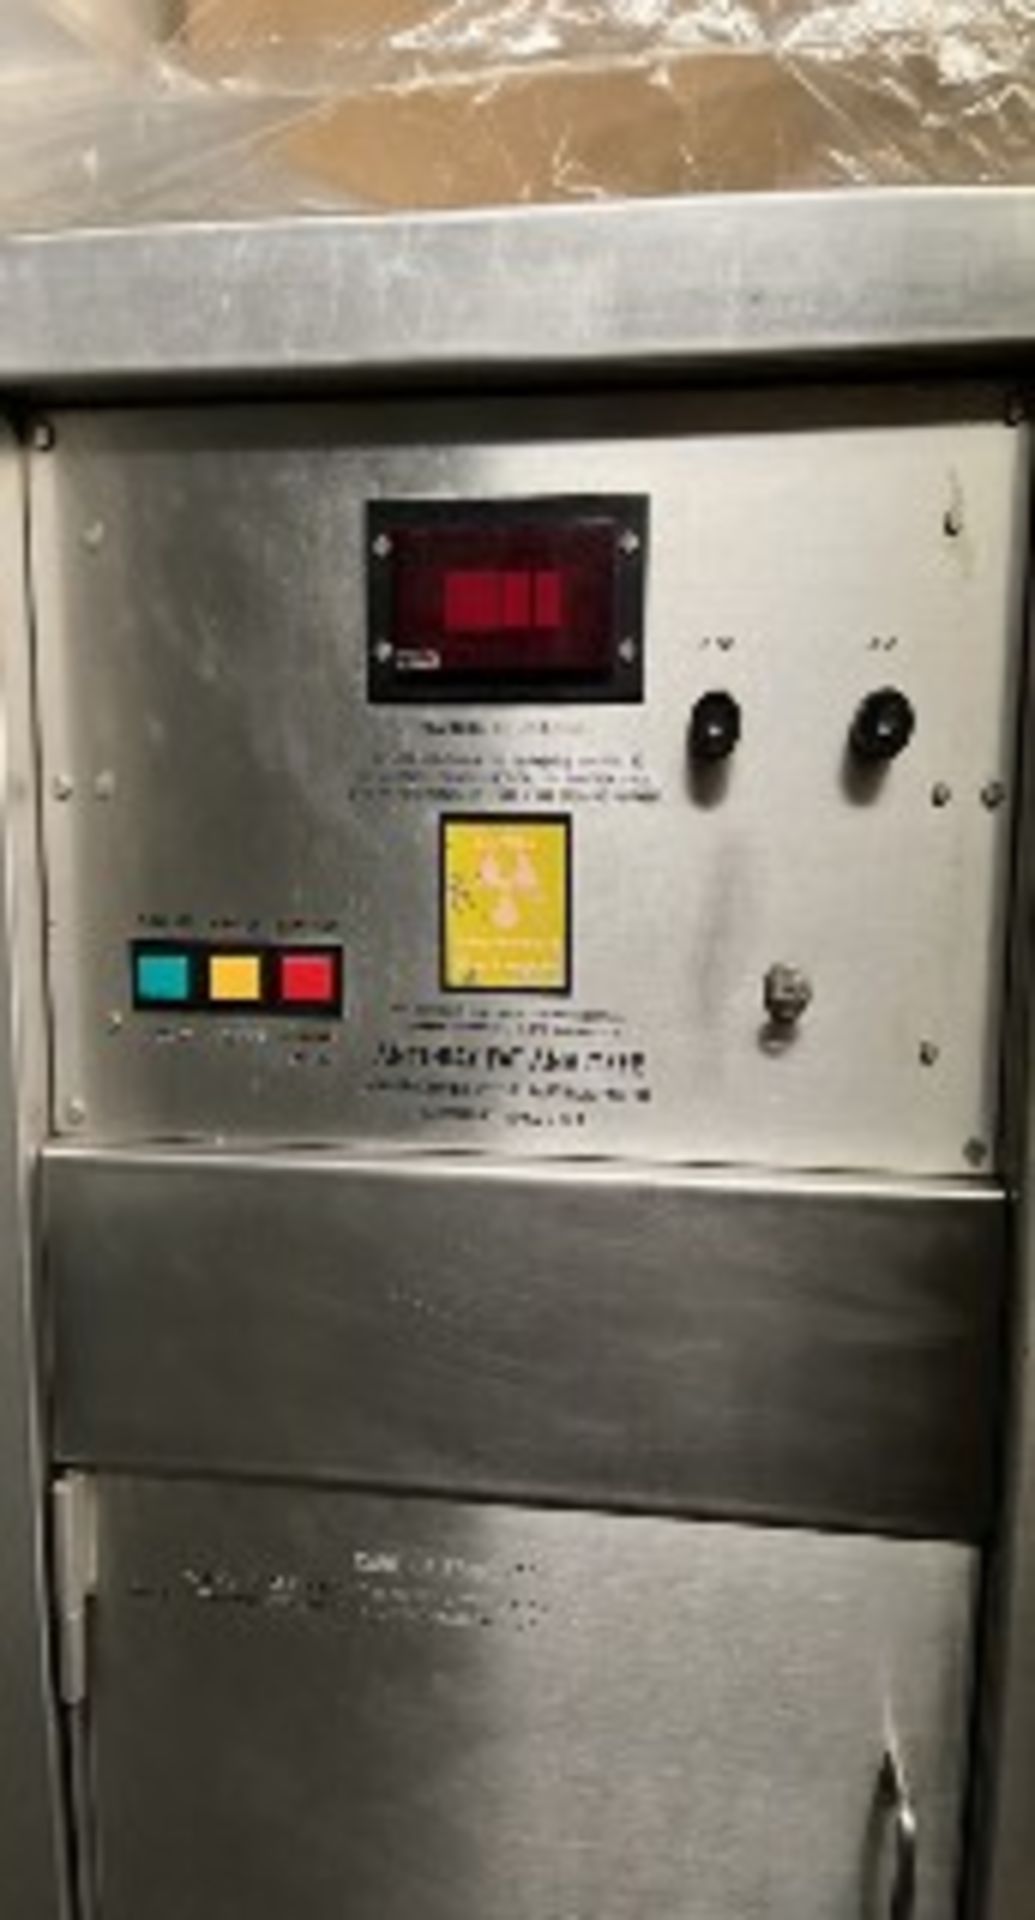 Anyl-Ray Fat Tester, Model 316-3, S/N 1350, Volt 115, Amp 2, Single Phase (Loading Fee $100) ( - Image 2 of 3